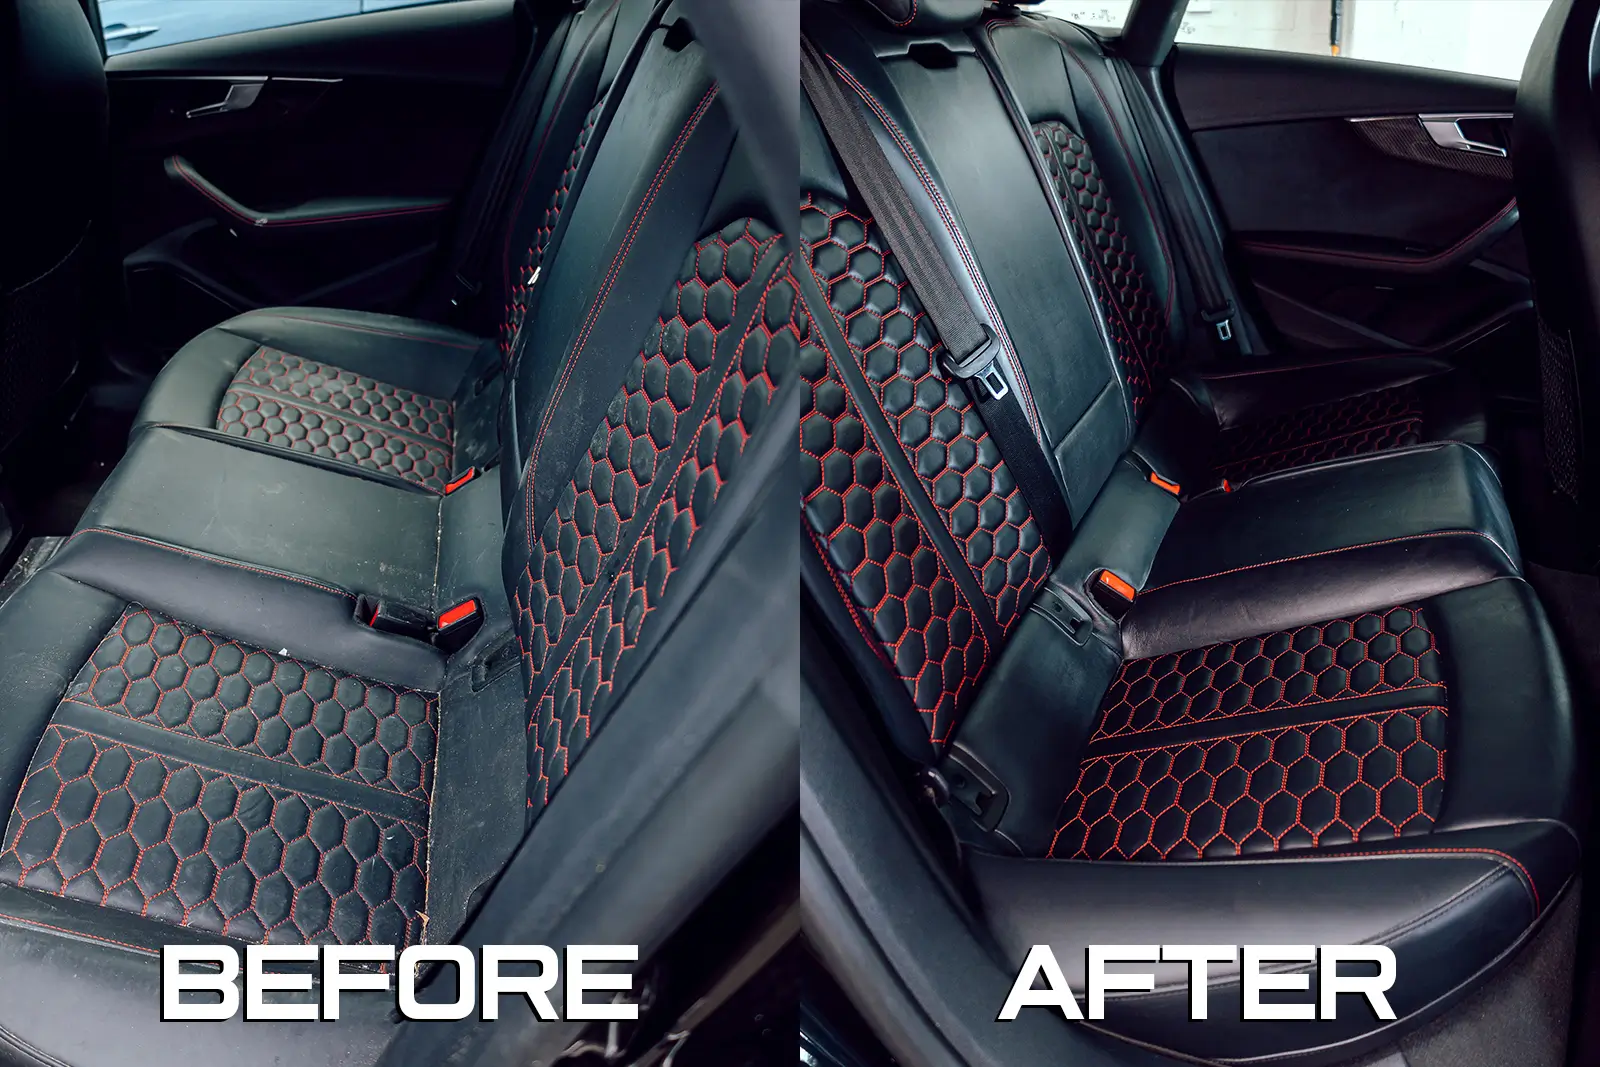 car seats before and after detailing - Calgary auto detailers